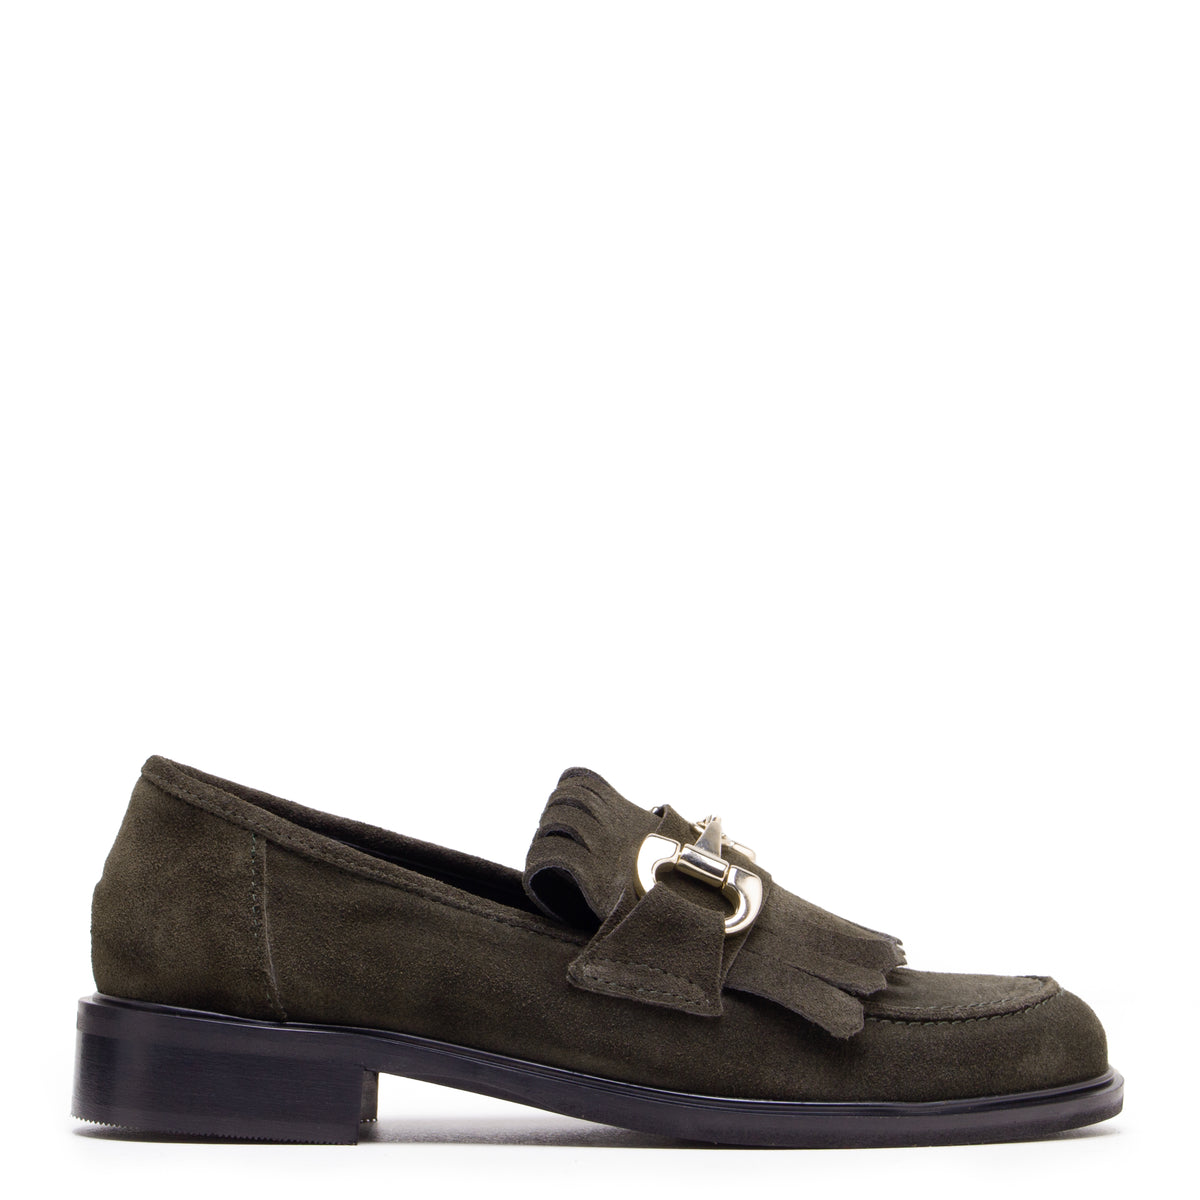 STOCCOLMA LOAFER